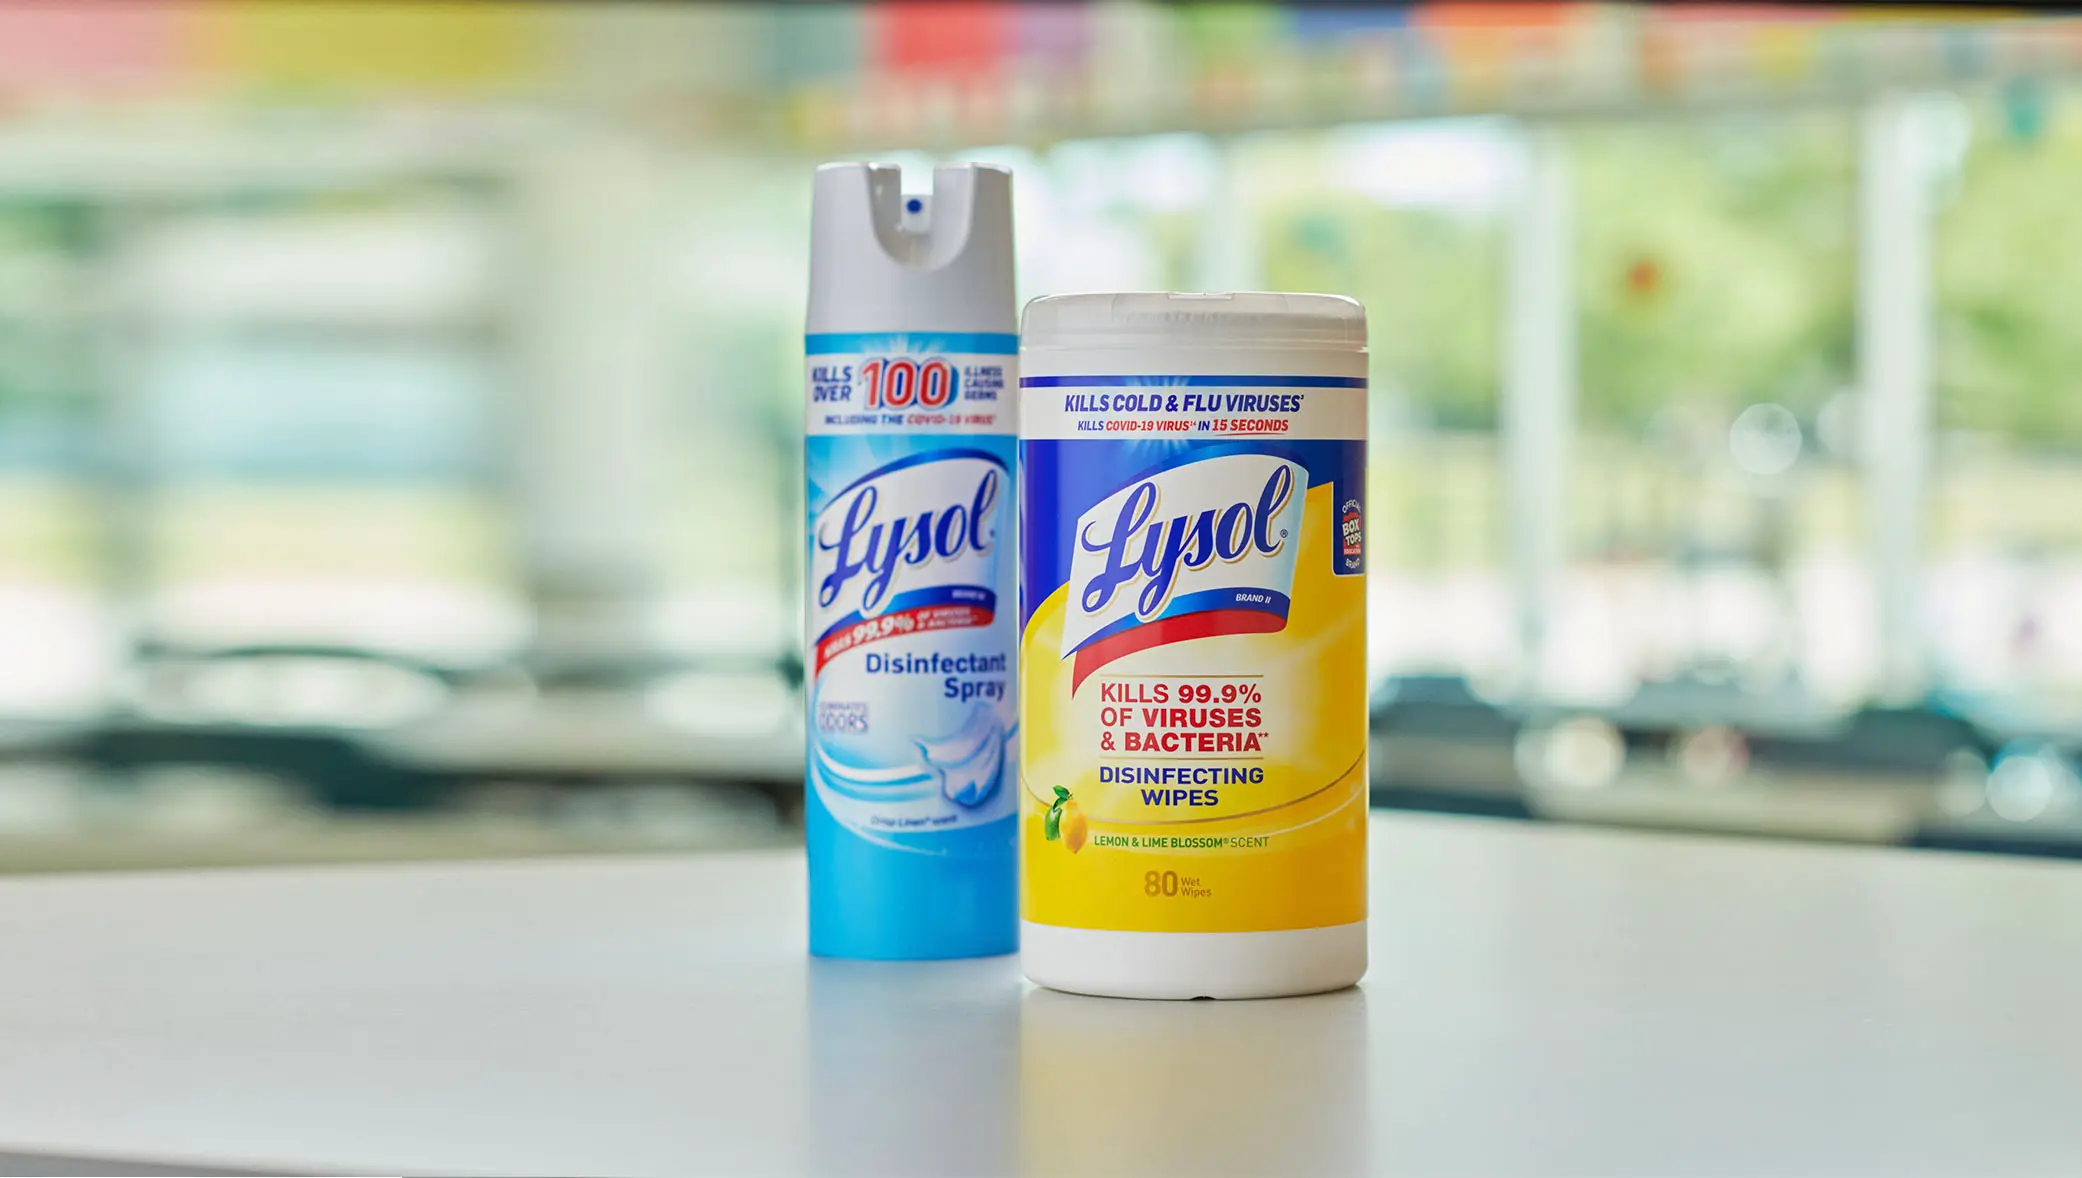 A vector based grid with a pinpoint representing the Lysol Germcast App and a Lysol logo above